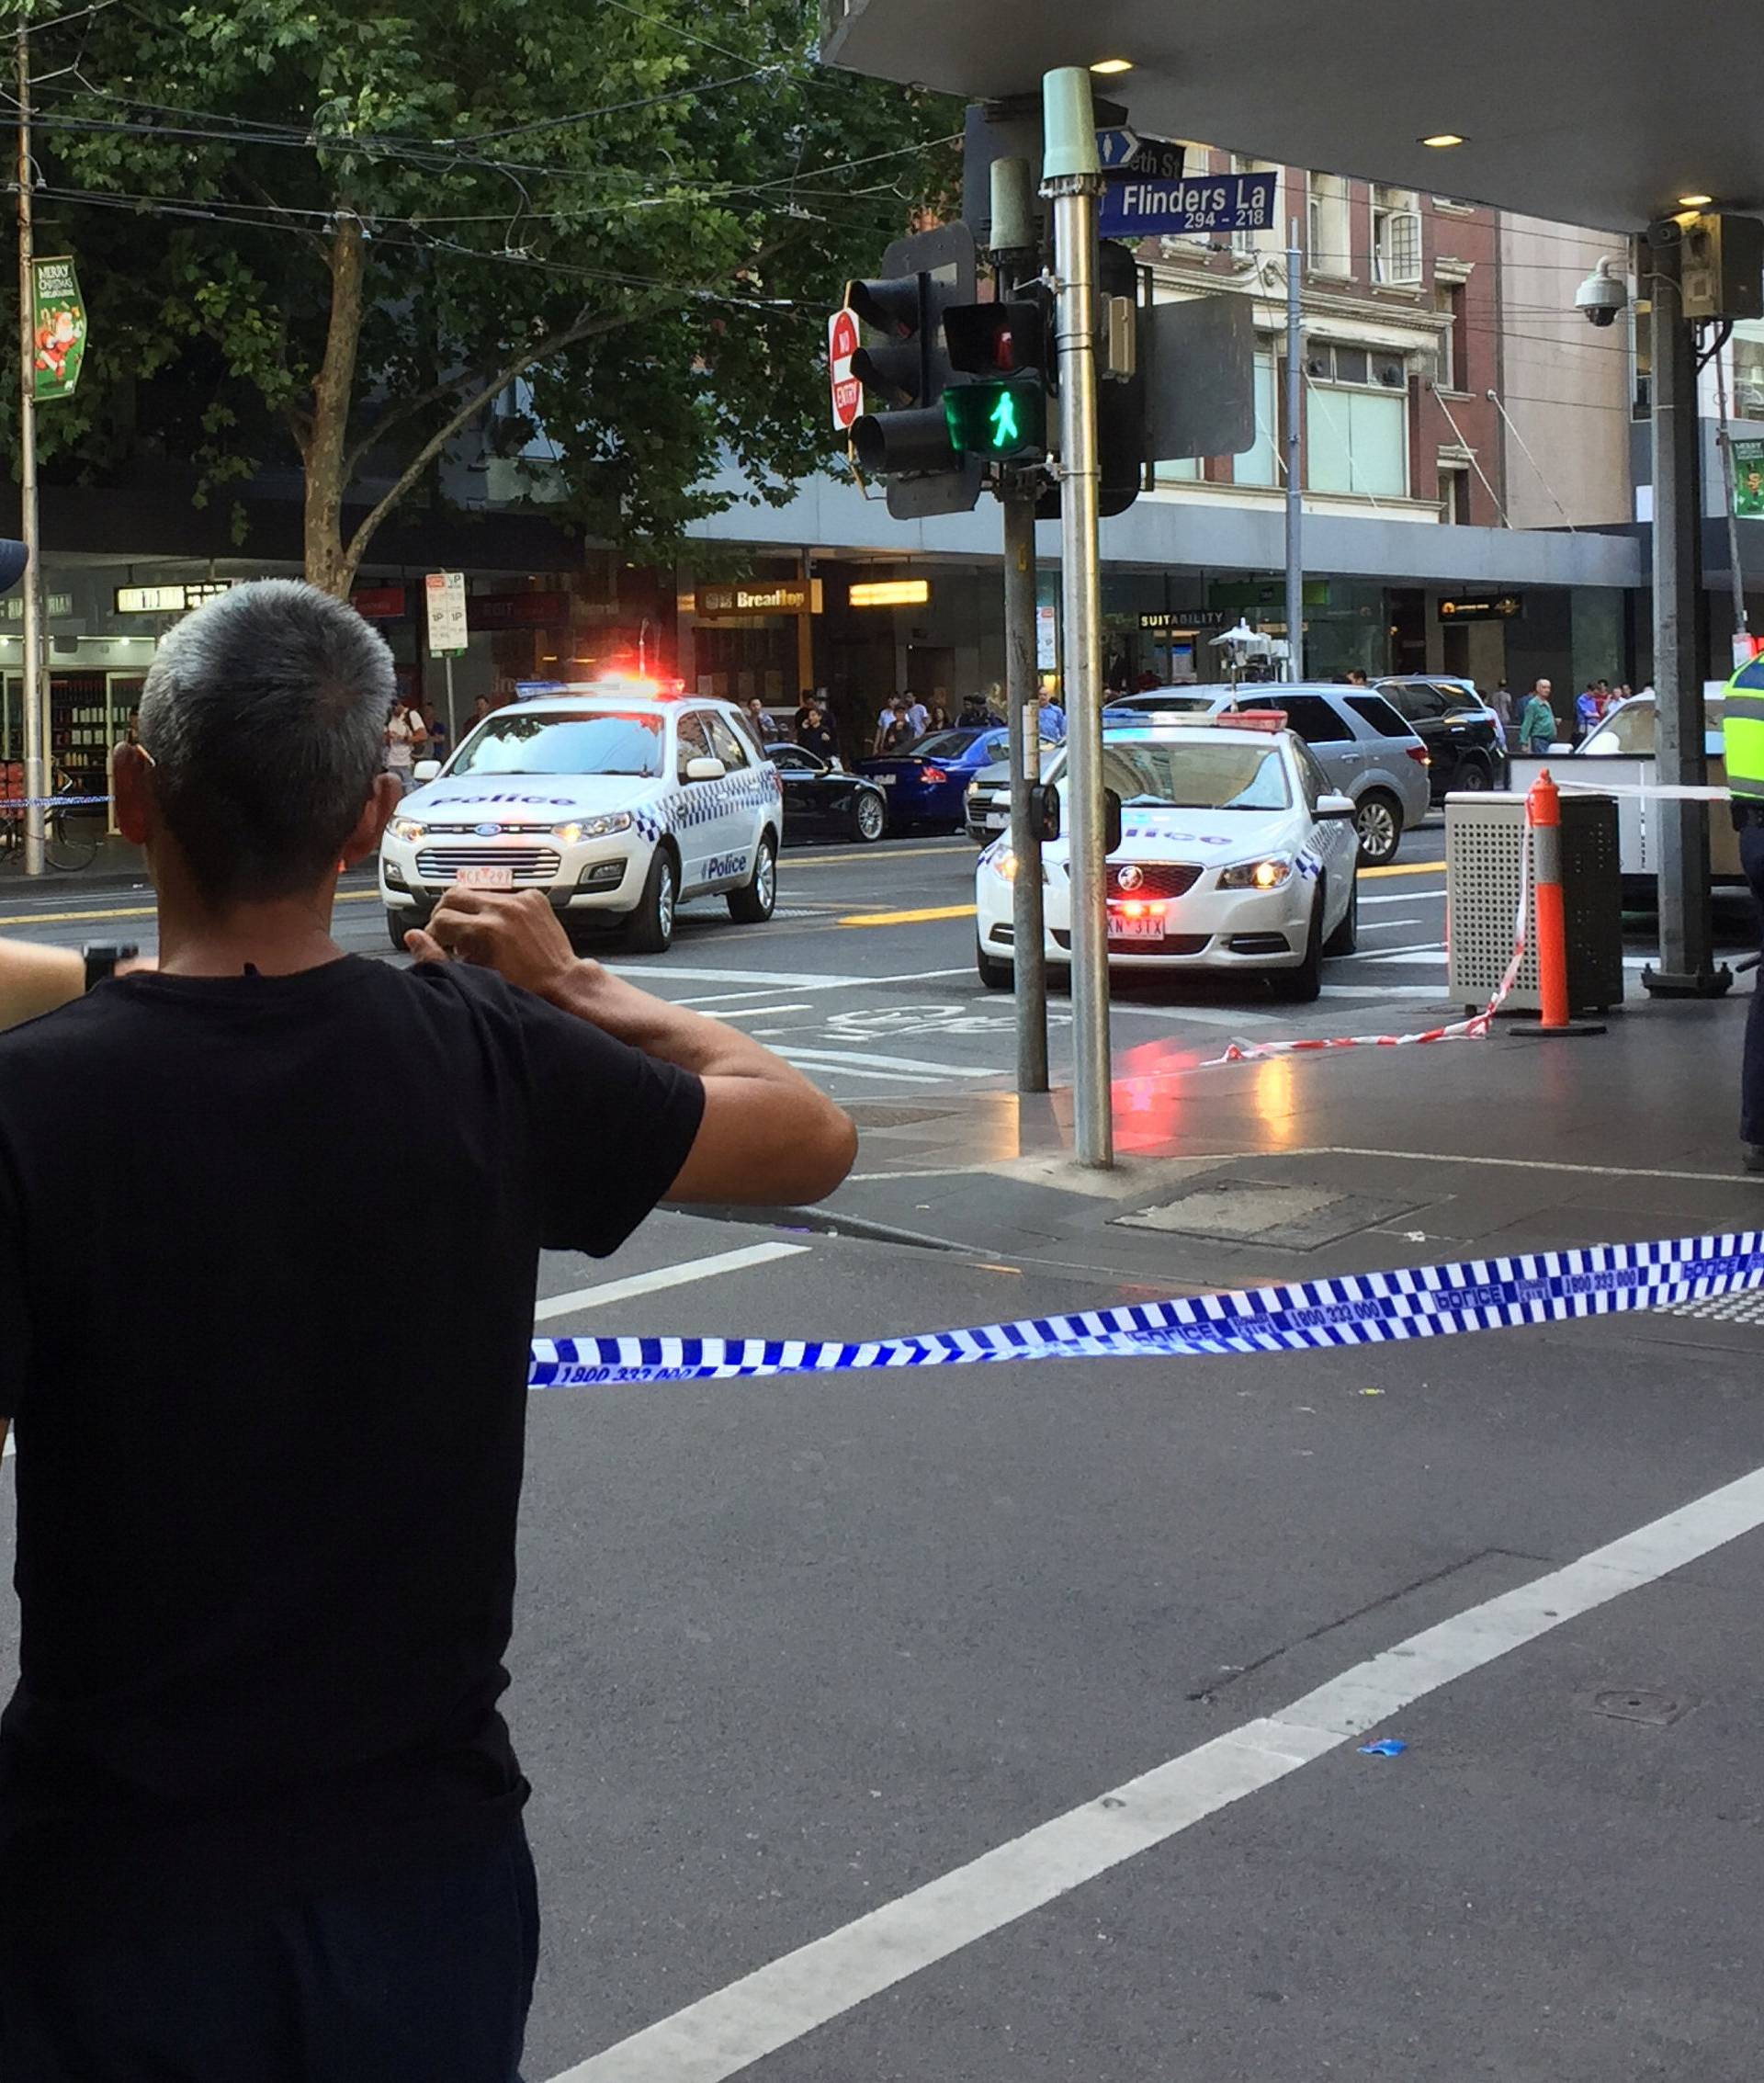 Police officers stand guard as members of the public stand behind police tape after the arrest of the driver of a vehicle that ploughed into pedestrians at a crowded intersection near the Flinders Street train station in central Melbourne